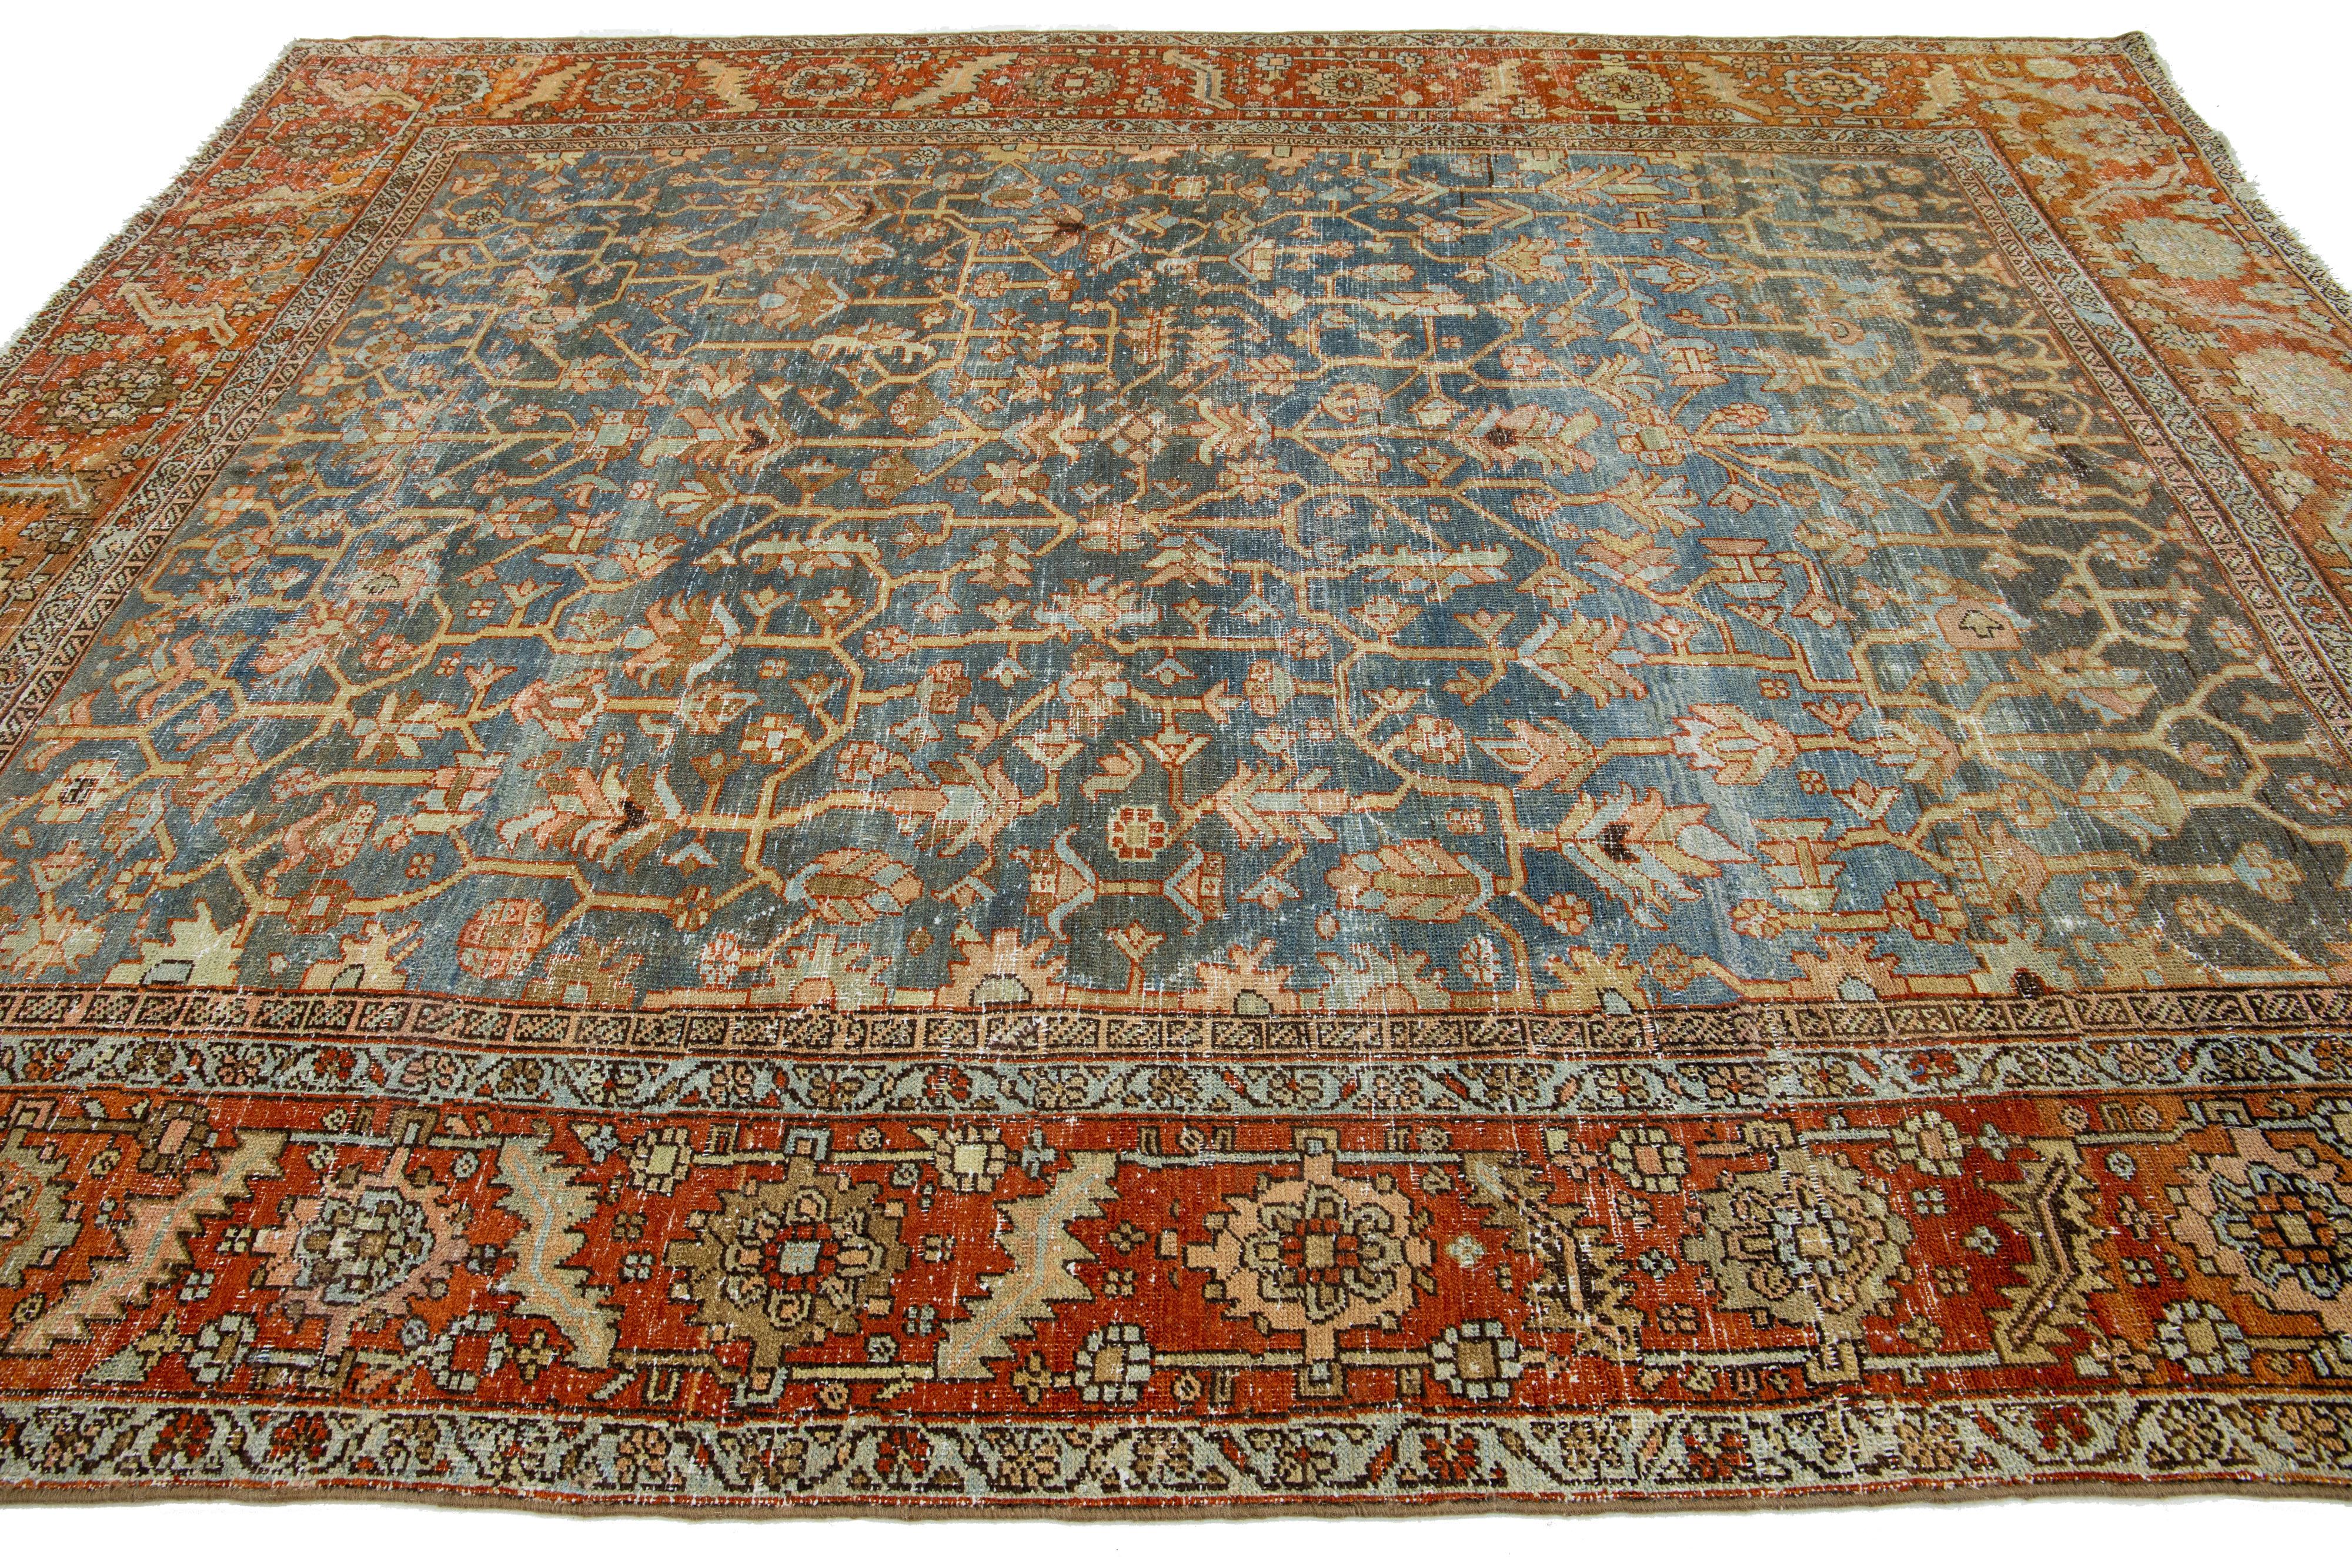 Allover Antique Persian Heriz Wool Rug Featuring In Blue From The 1910s In Good Condition For Sale In Norwalk, CT